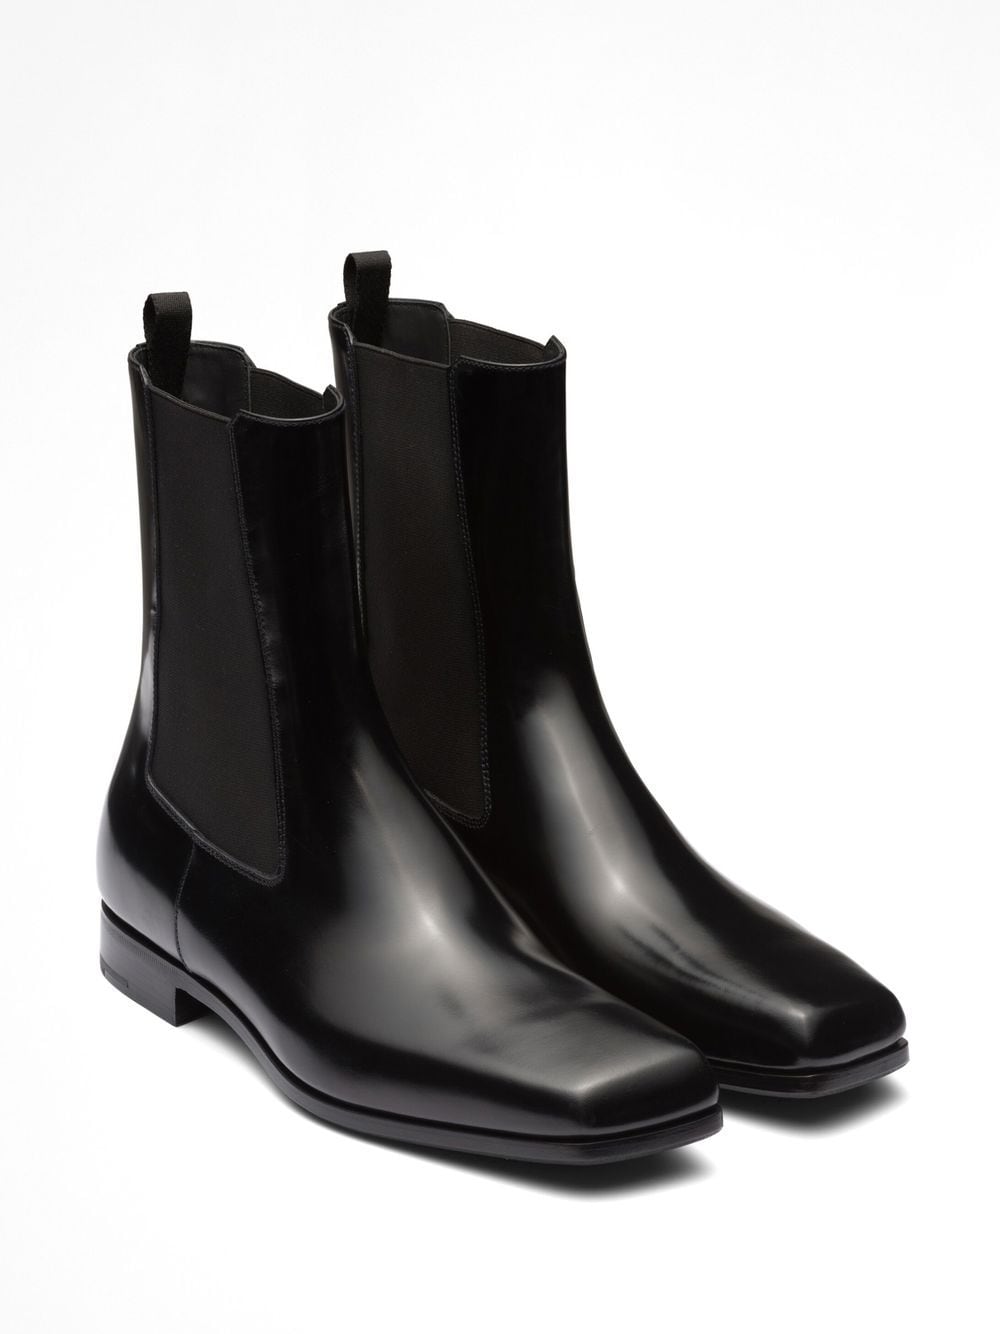 Prada Brushed Leather Chelsea Boots - Farfetch